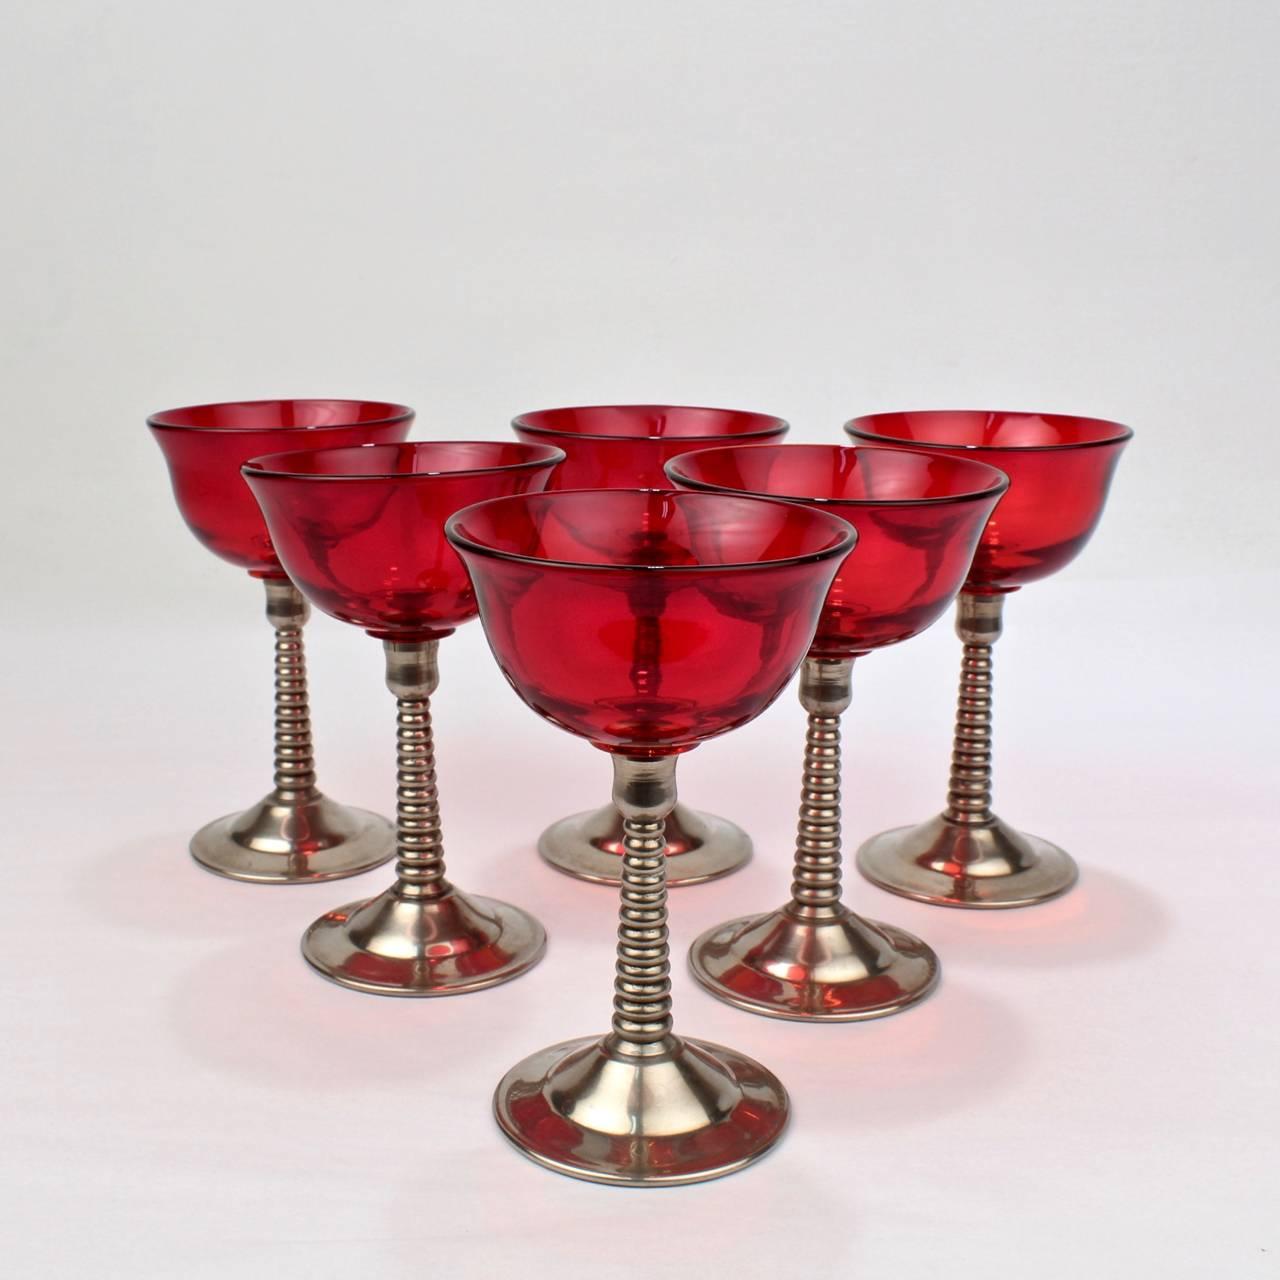 A terrific set of 6 Machine Age silver plate and red glass cocktail glasses by Lehman Brothers. Perfect for a Martini.

Dating to the 1930s or 1940s.

With screw in glass inserts.

Height: circa 5 in.

Items purchased from David Sterner